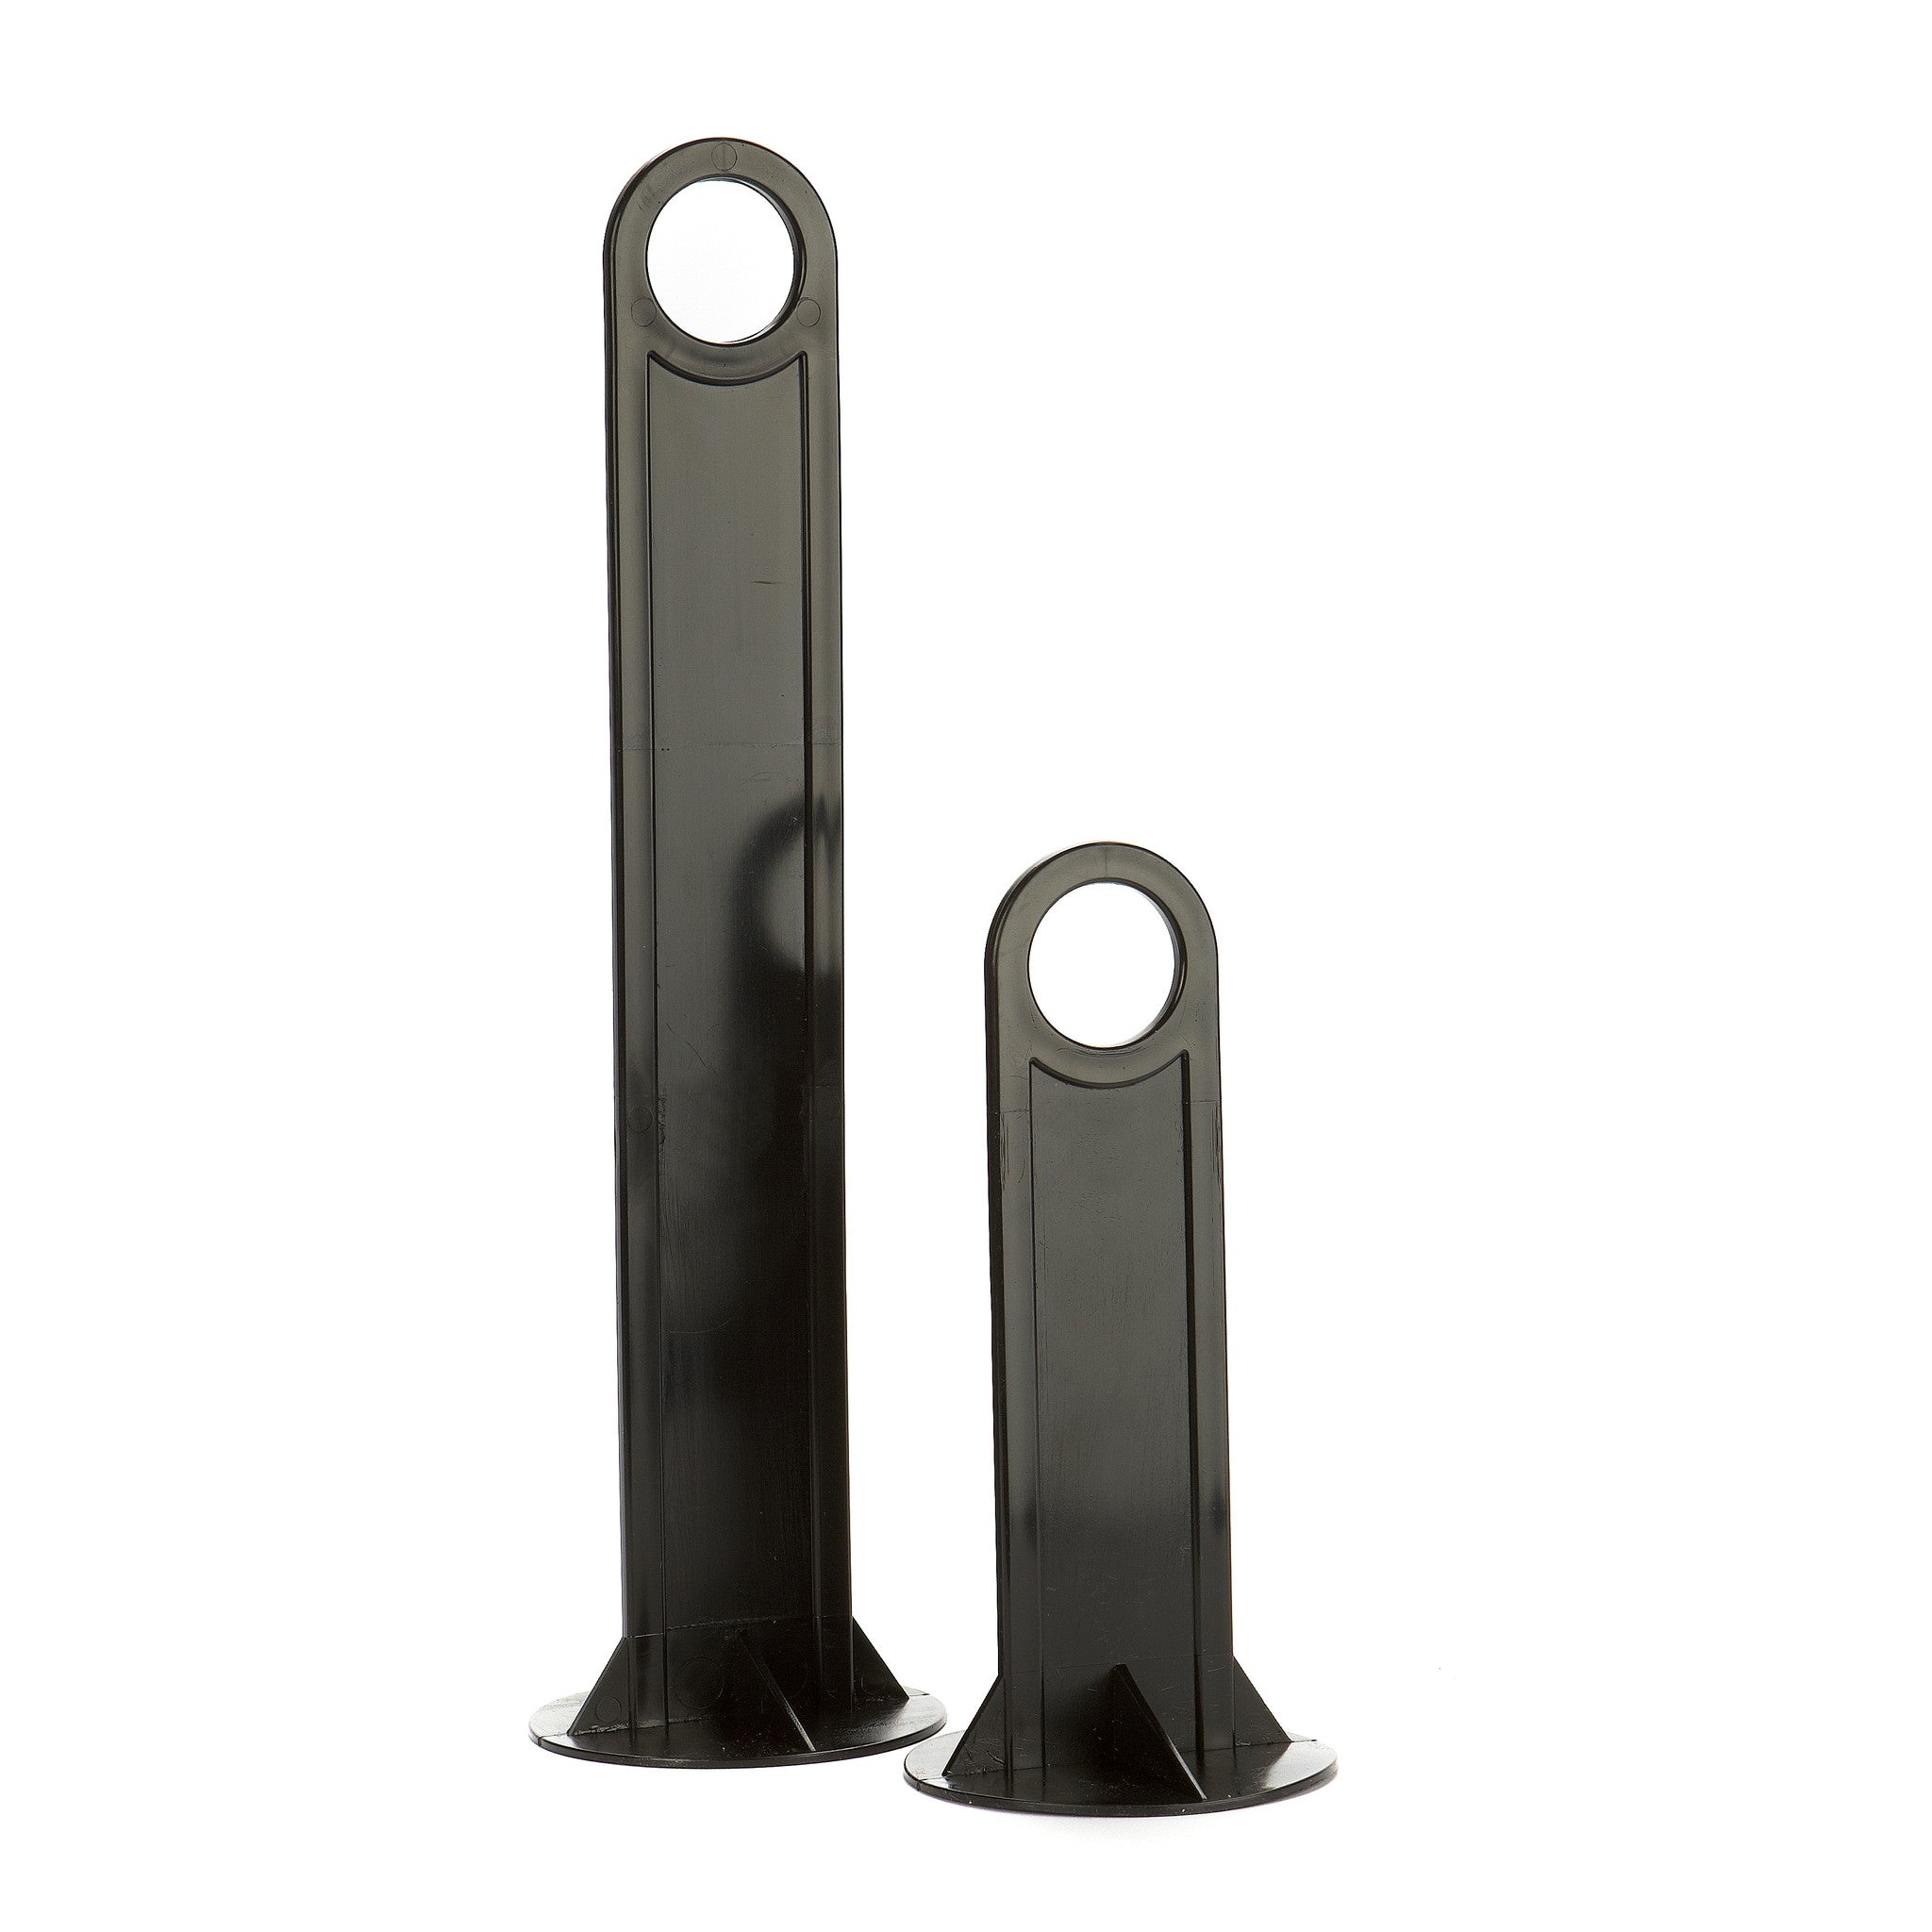 Small Sports Marker carry support pole & large Sports Marker carry support pole. Quality black plastic. 